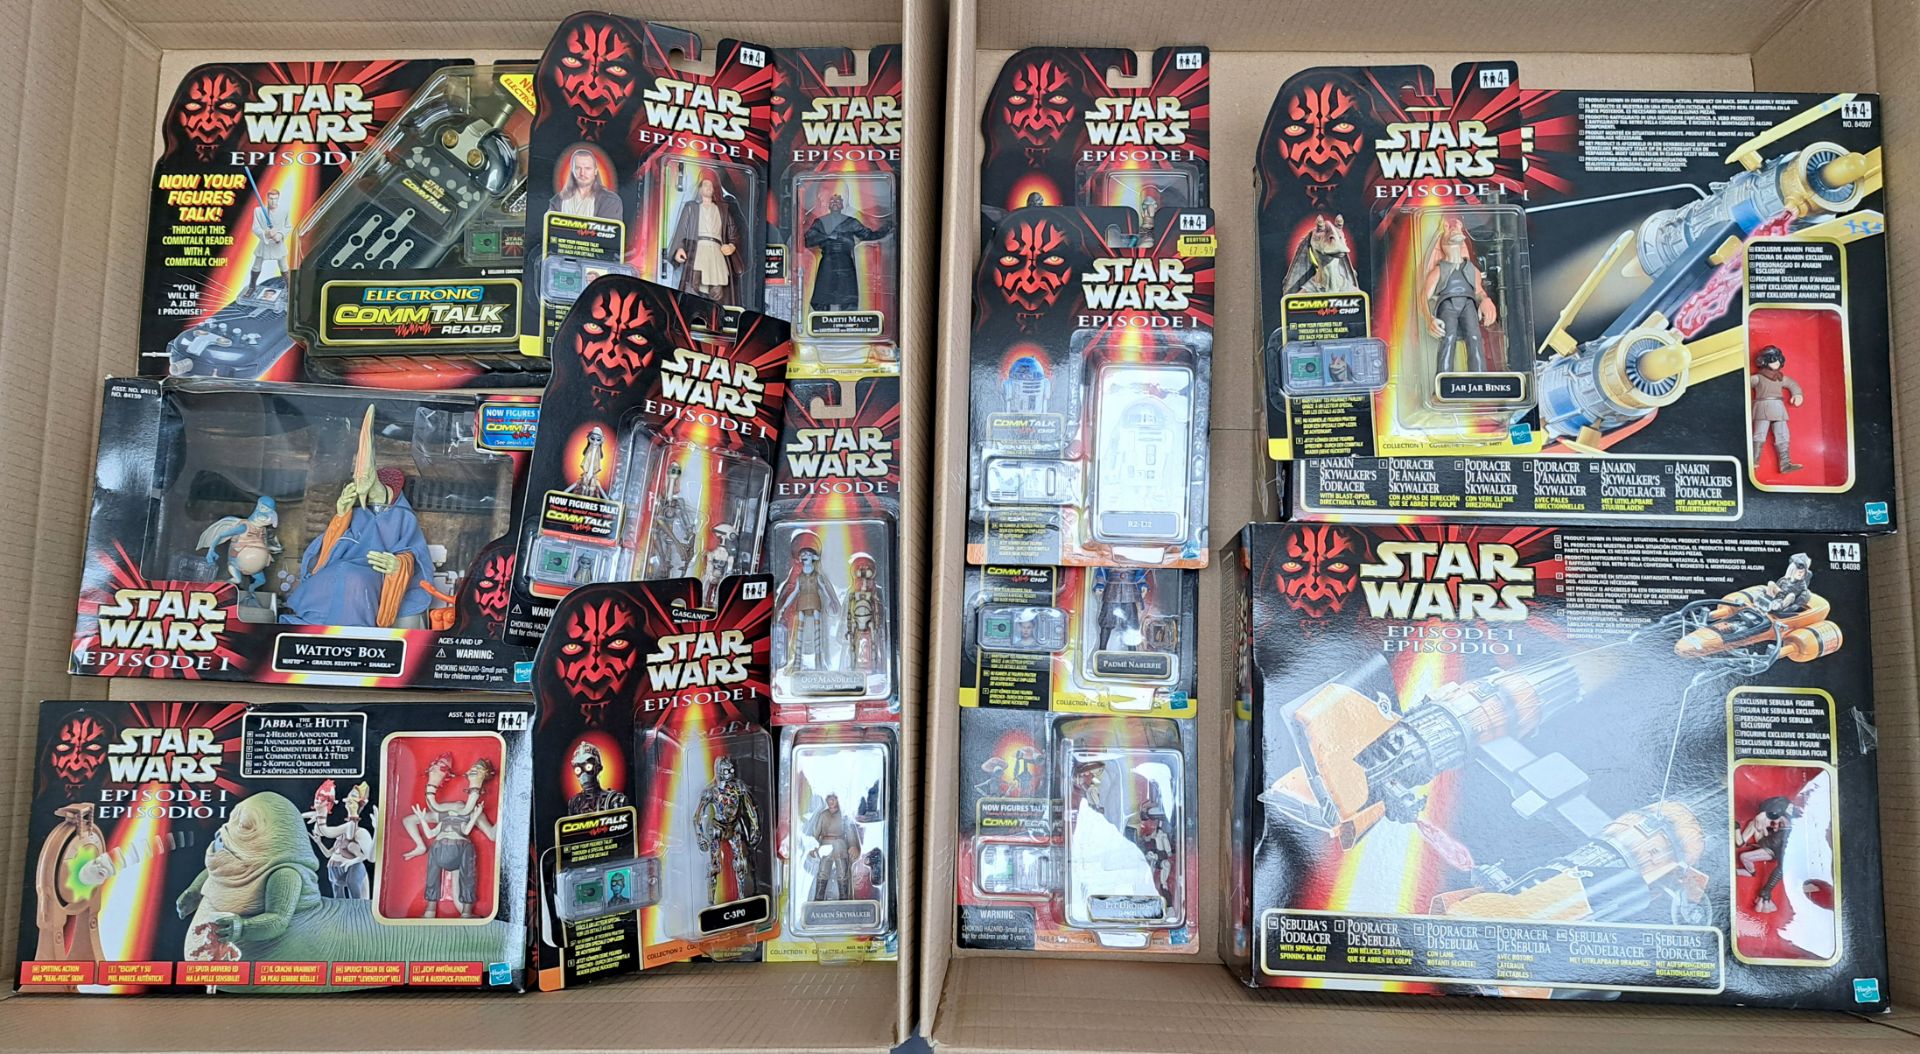 Star Wars Episode 1 Podracing scene related Figures, Watto's Box and Ships mixed lot 